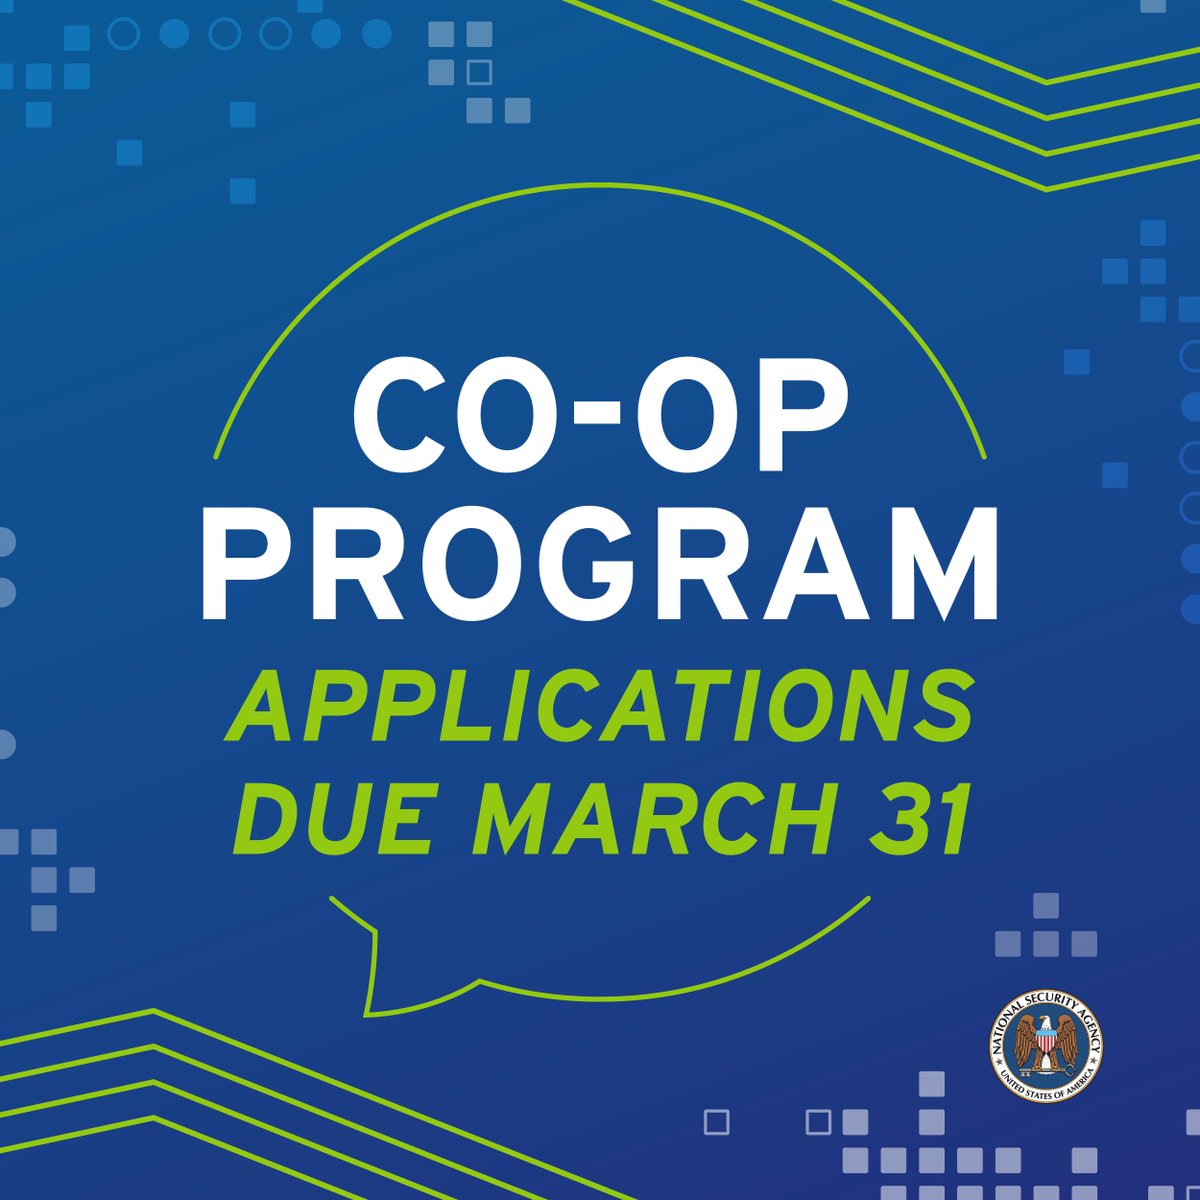 Here’s a program that pays you to spend multiple semesters learning at NSA while you’re still in college. Check out the details and apply by March 31! bit.ly/42StqoS #collegeinternship #governmentinternship